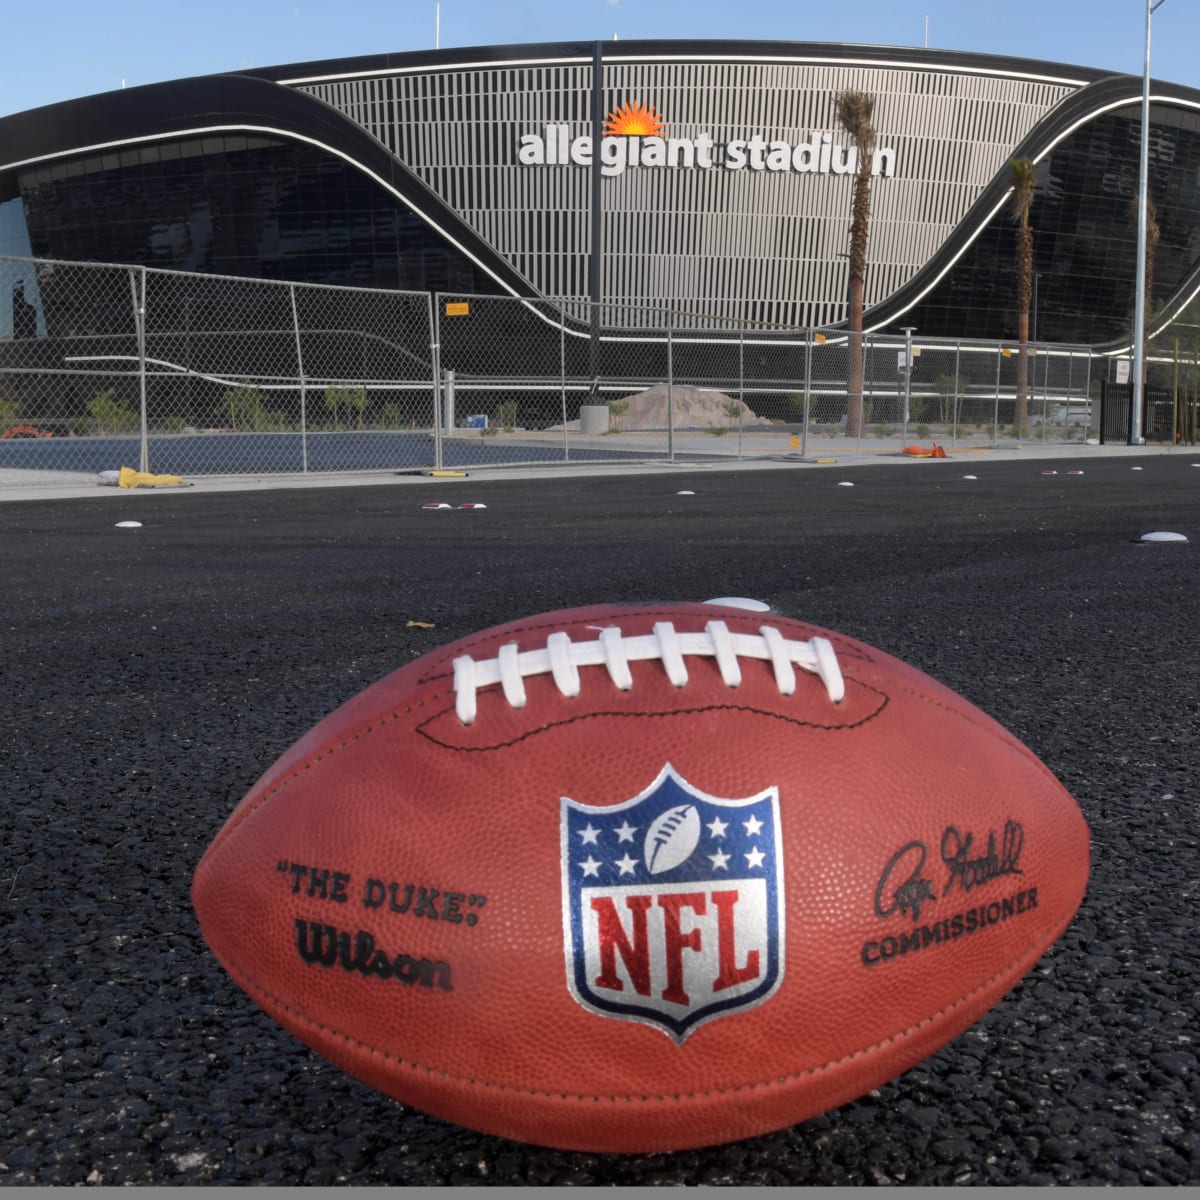 Tickets for NFL Pro Bowl in Las Vegas go on sale to public next week